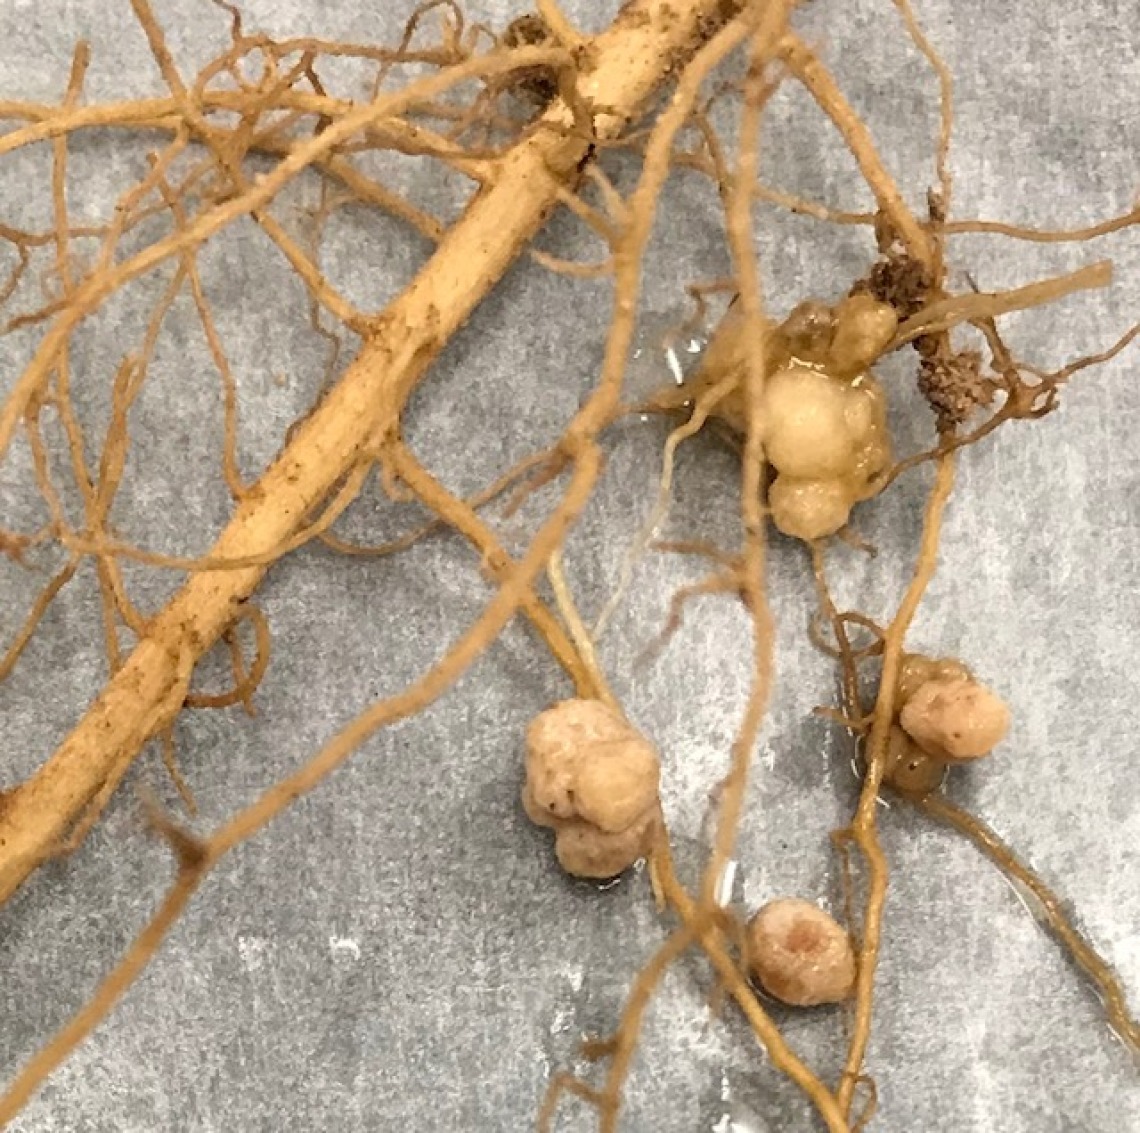 Nodules from the roots of guar plants grown at NMSU’s Leyendecker Science Center.